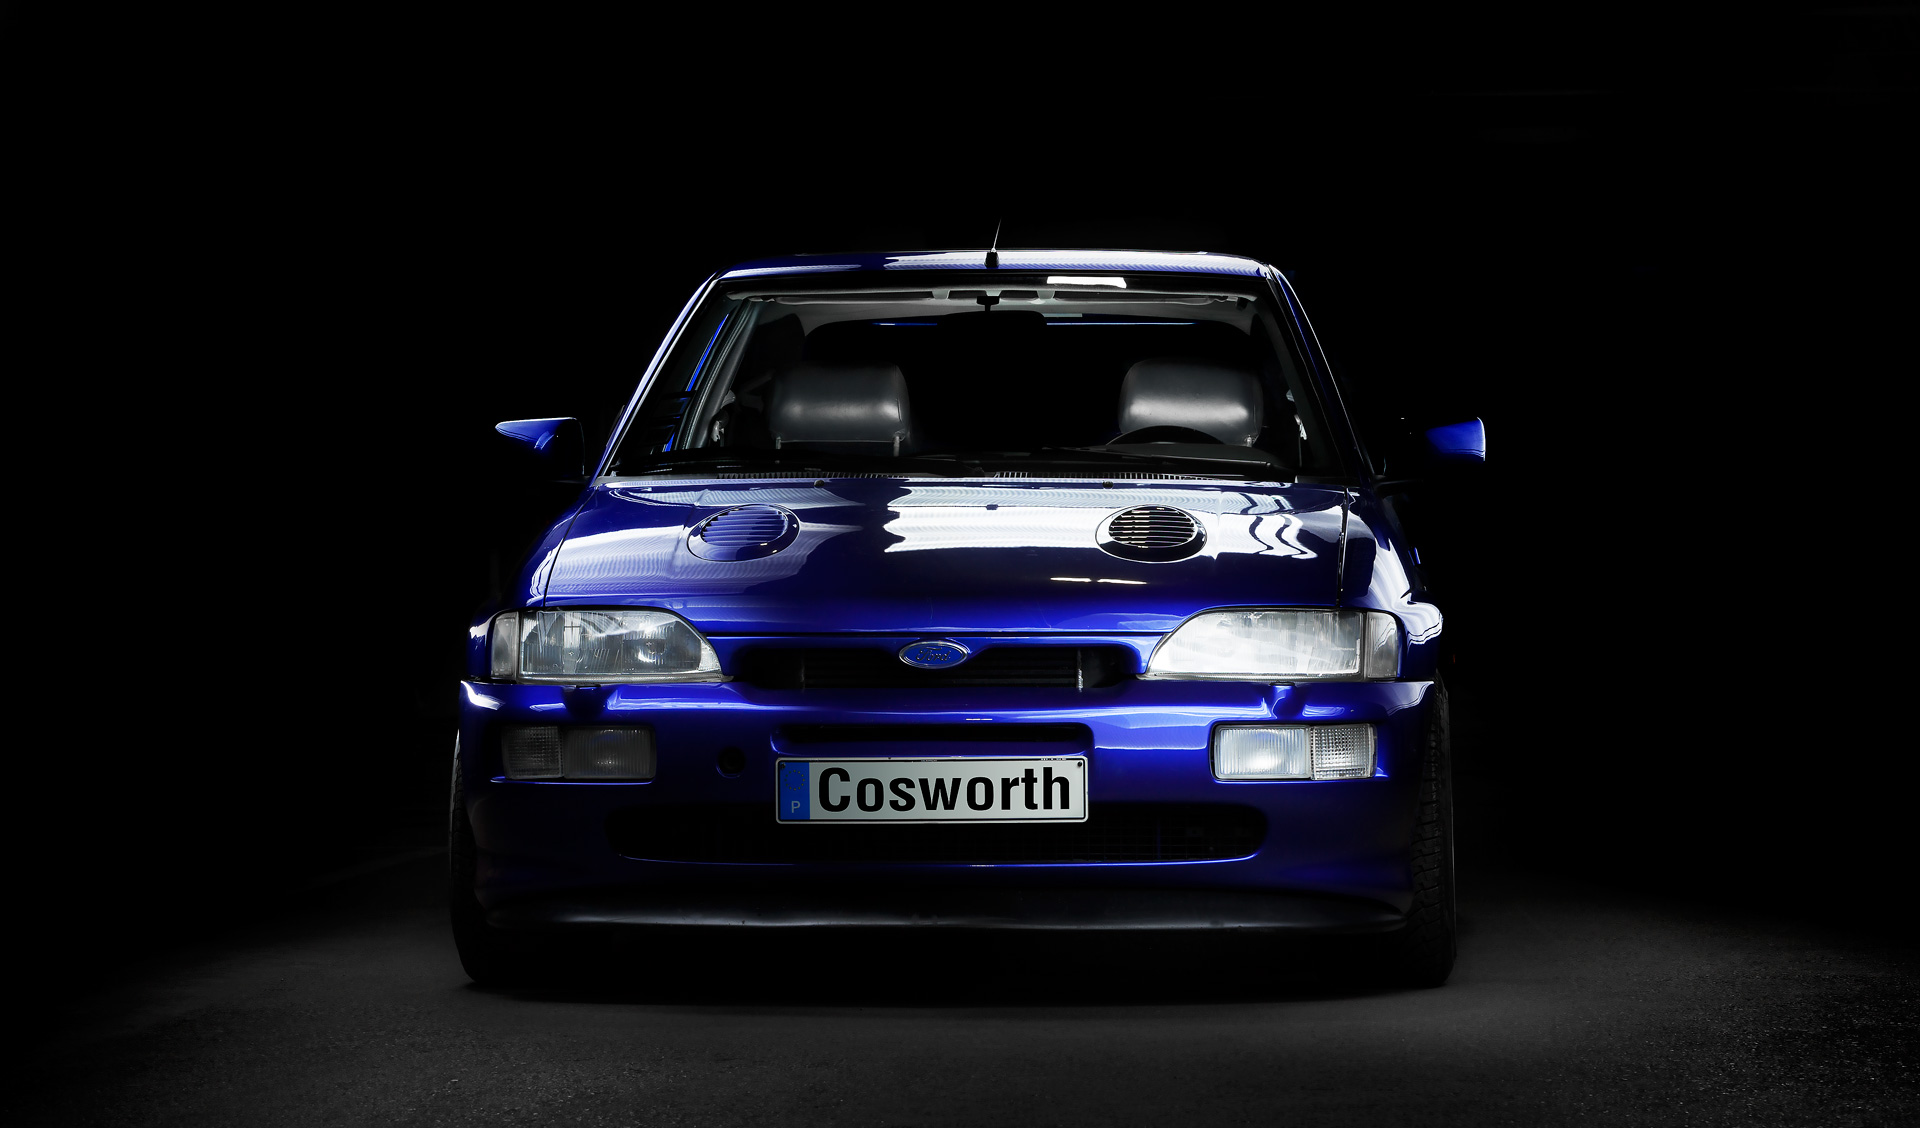 General 1920x1128 Ford Ford Escort Cosworth blue cars English cars race cars Rally rally cars old car British cars